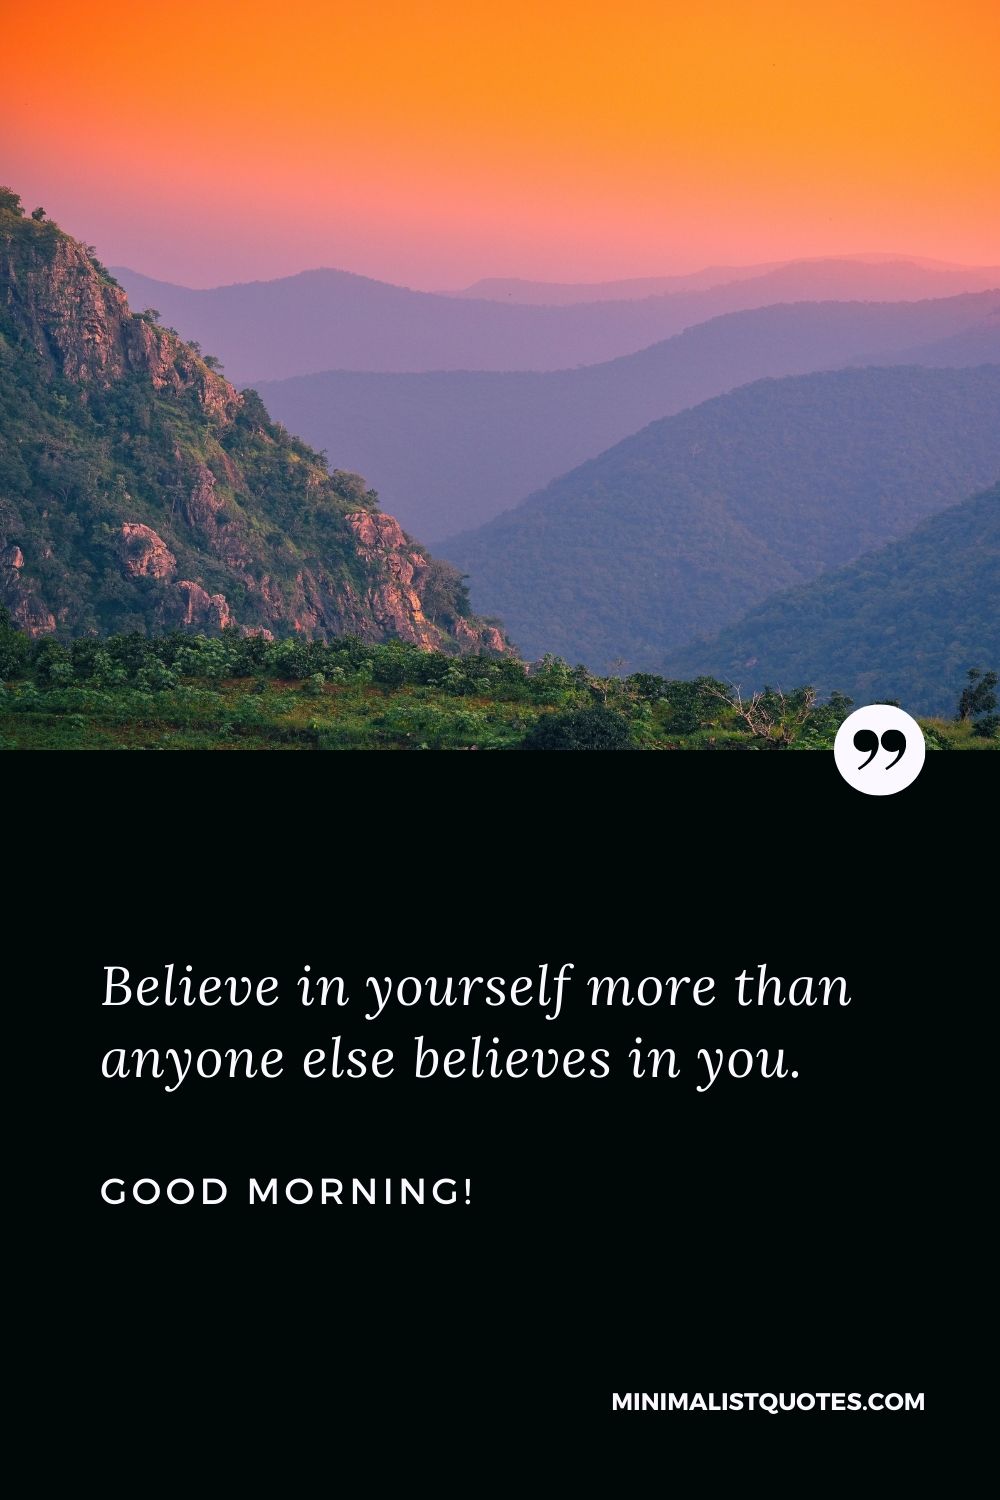 Thoughtful good morning message: Believe in yourself more than anyone else believes in you. Good Morning!